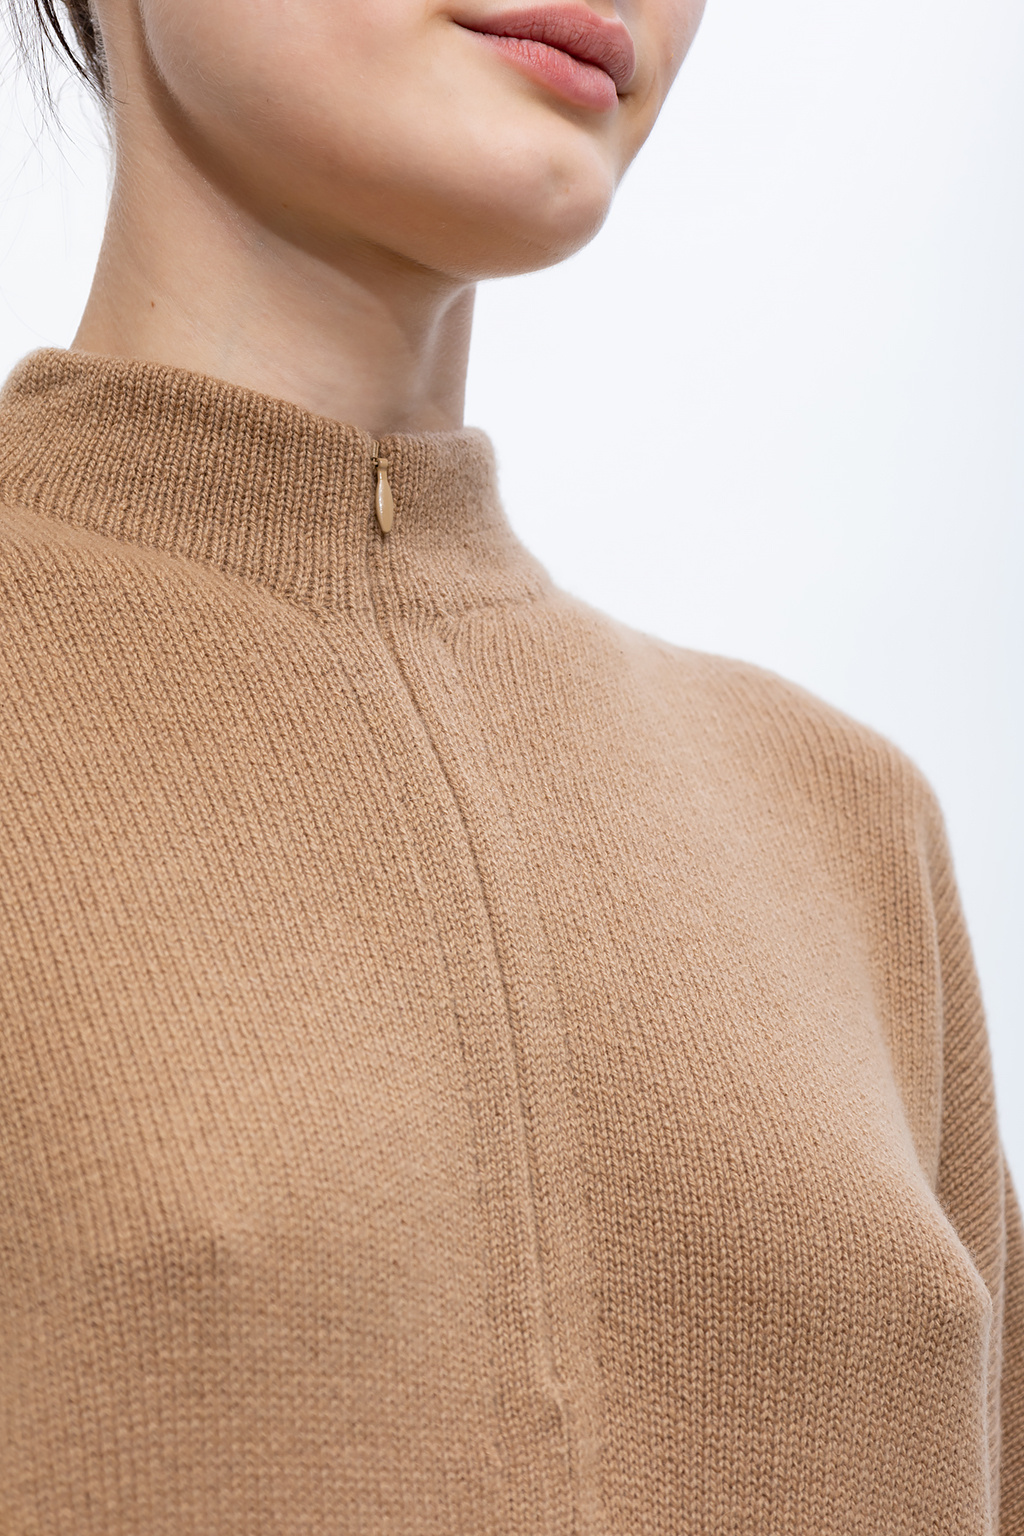 Theory Sweater with stand collar